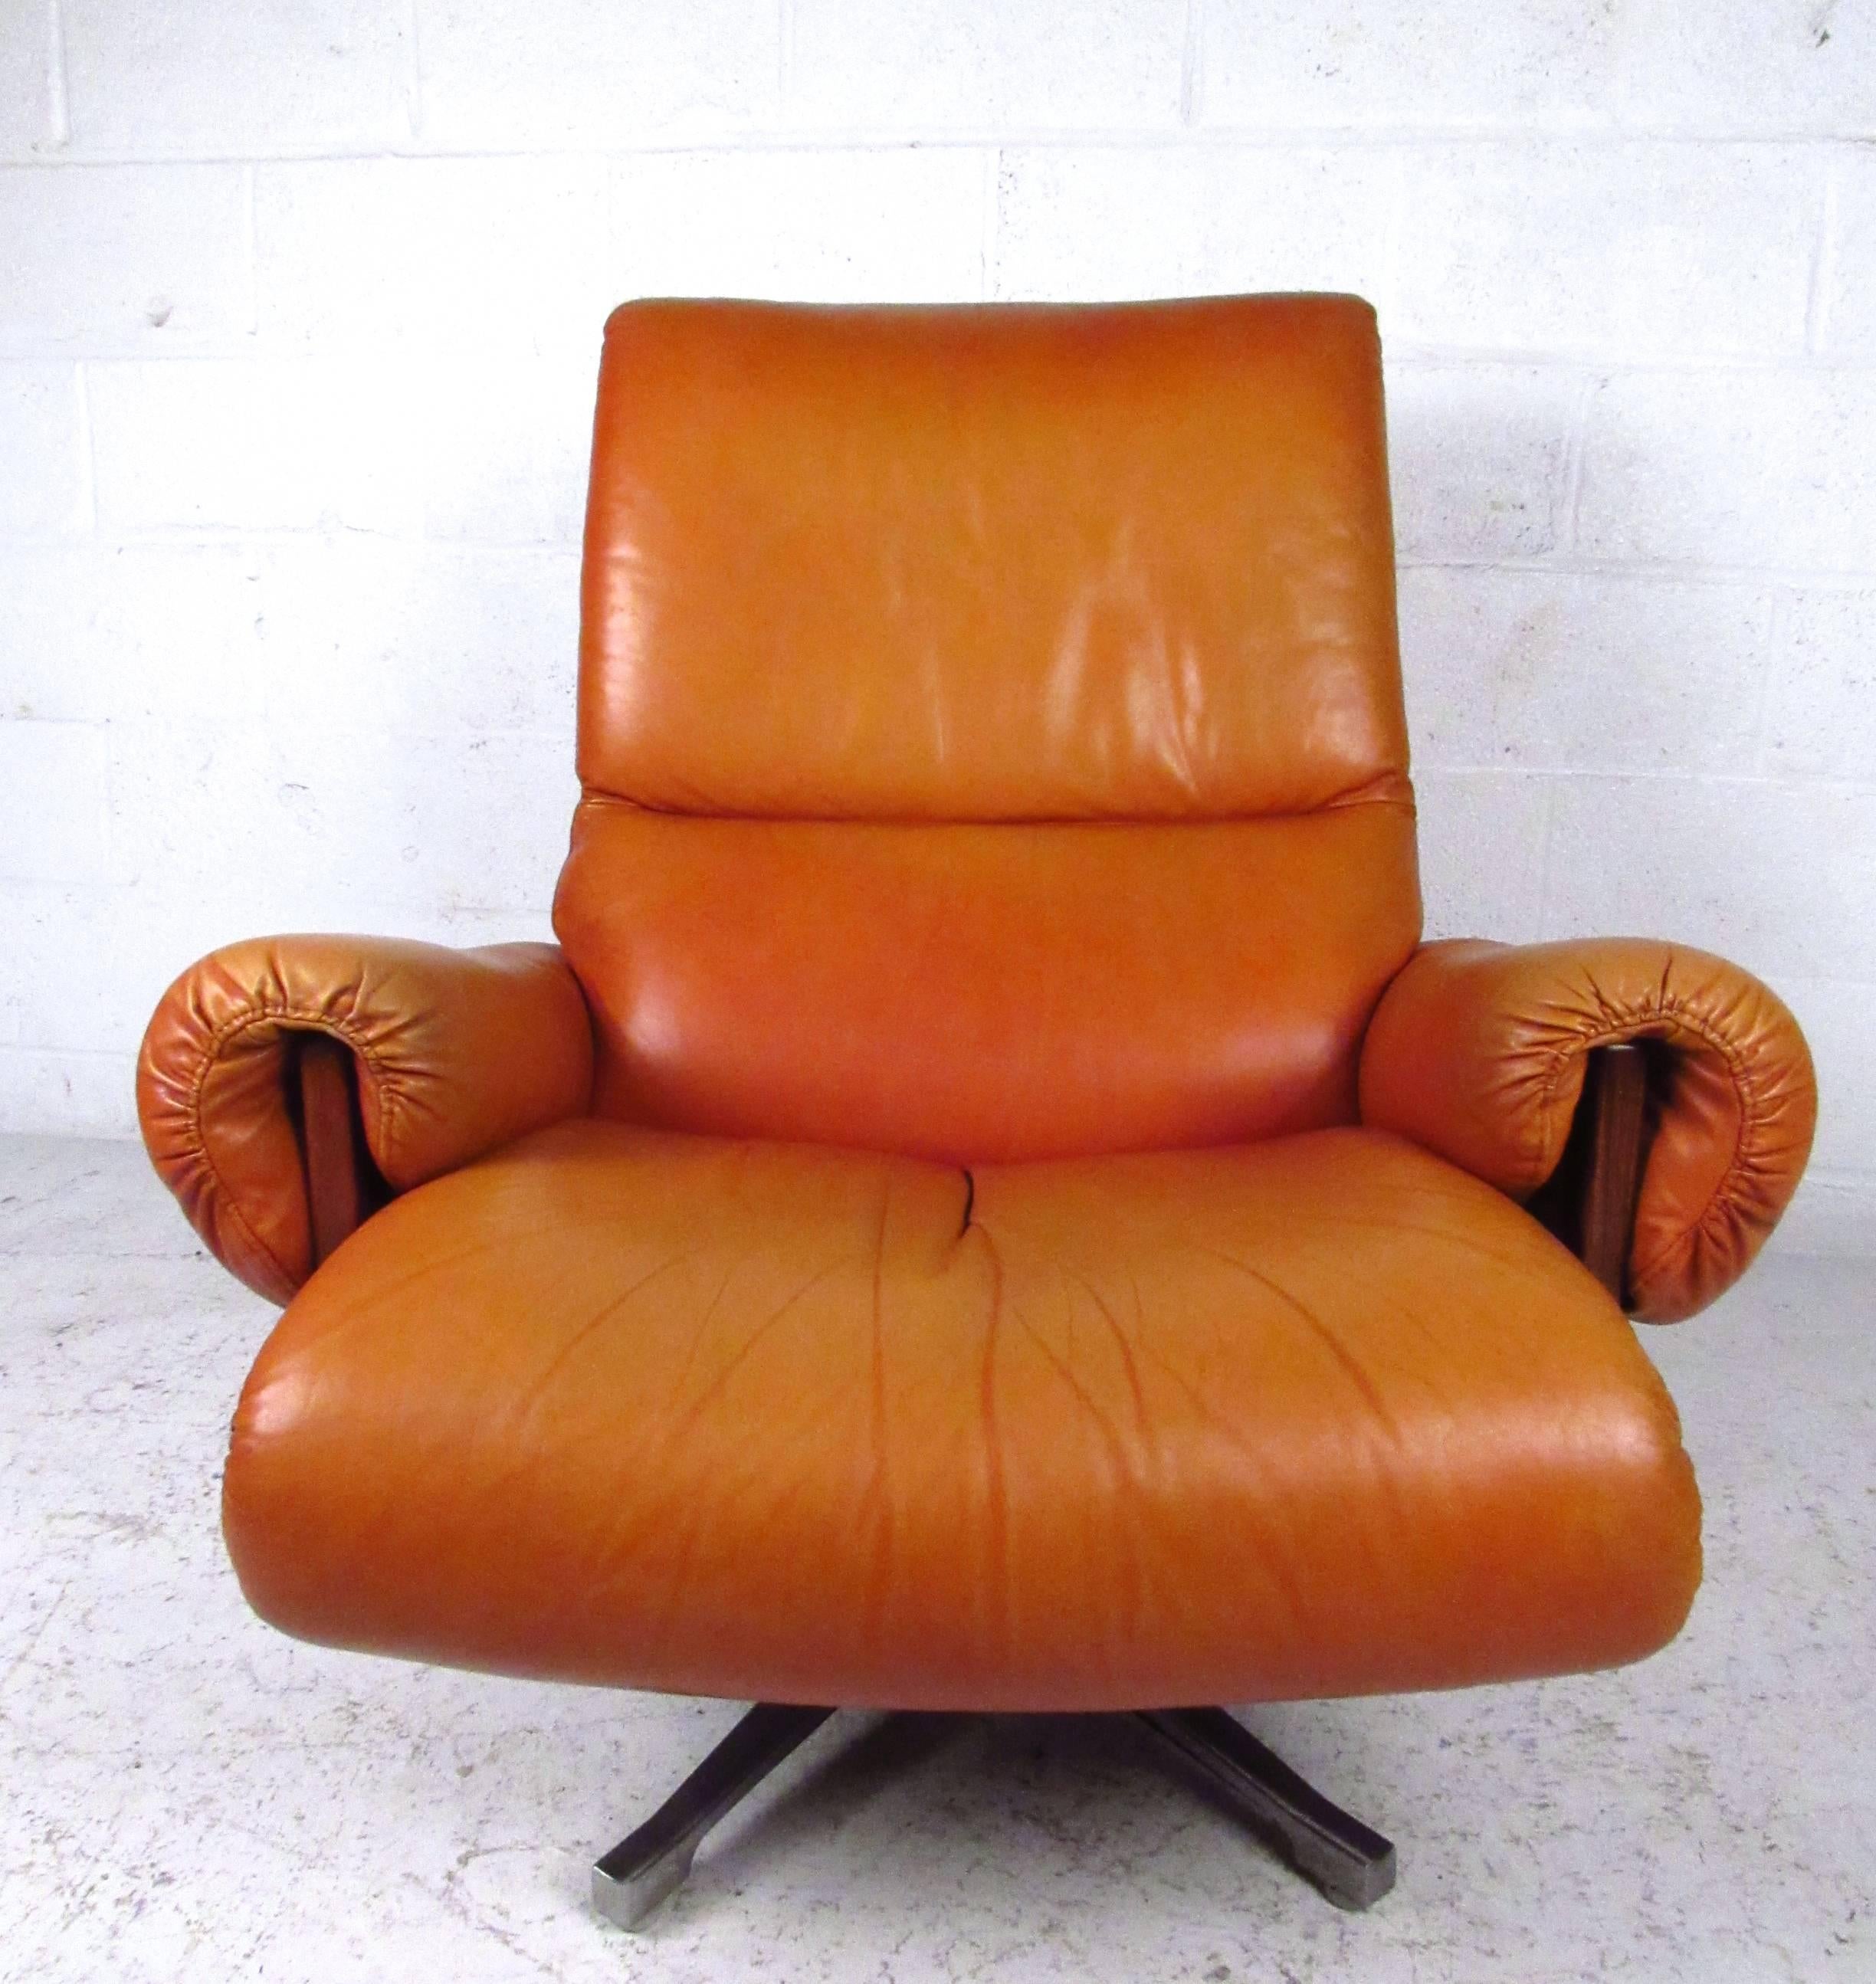 This unique and stylish pair of Scandinavian modern swivel chairs features comfortable leather upholstery, ample padding on arm rests and seat back, and a low profile swivel that adds even more comfort to the set. Rosewood frames show quality